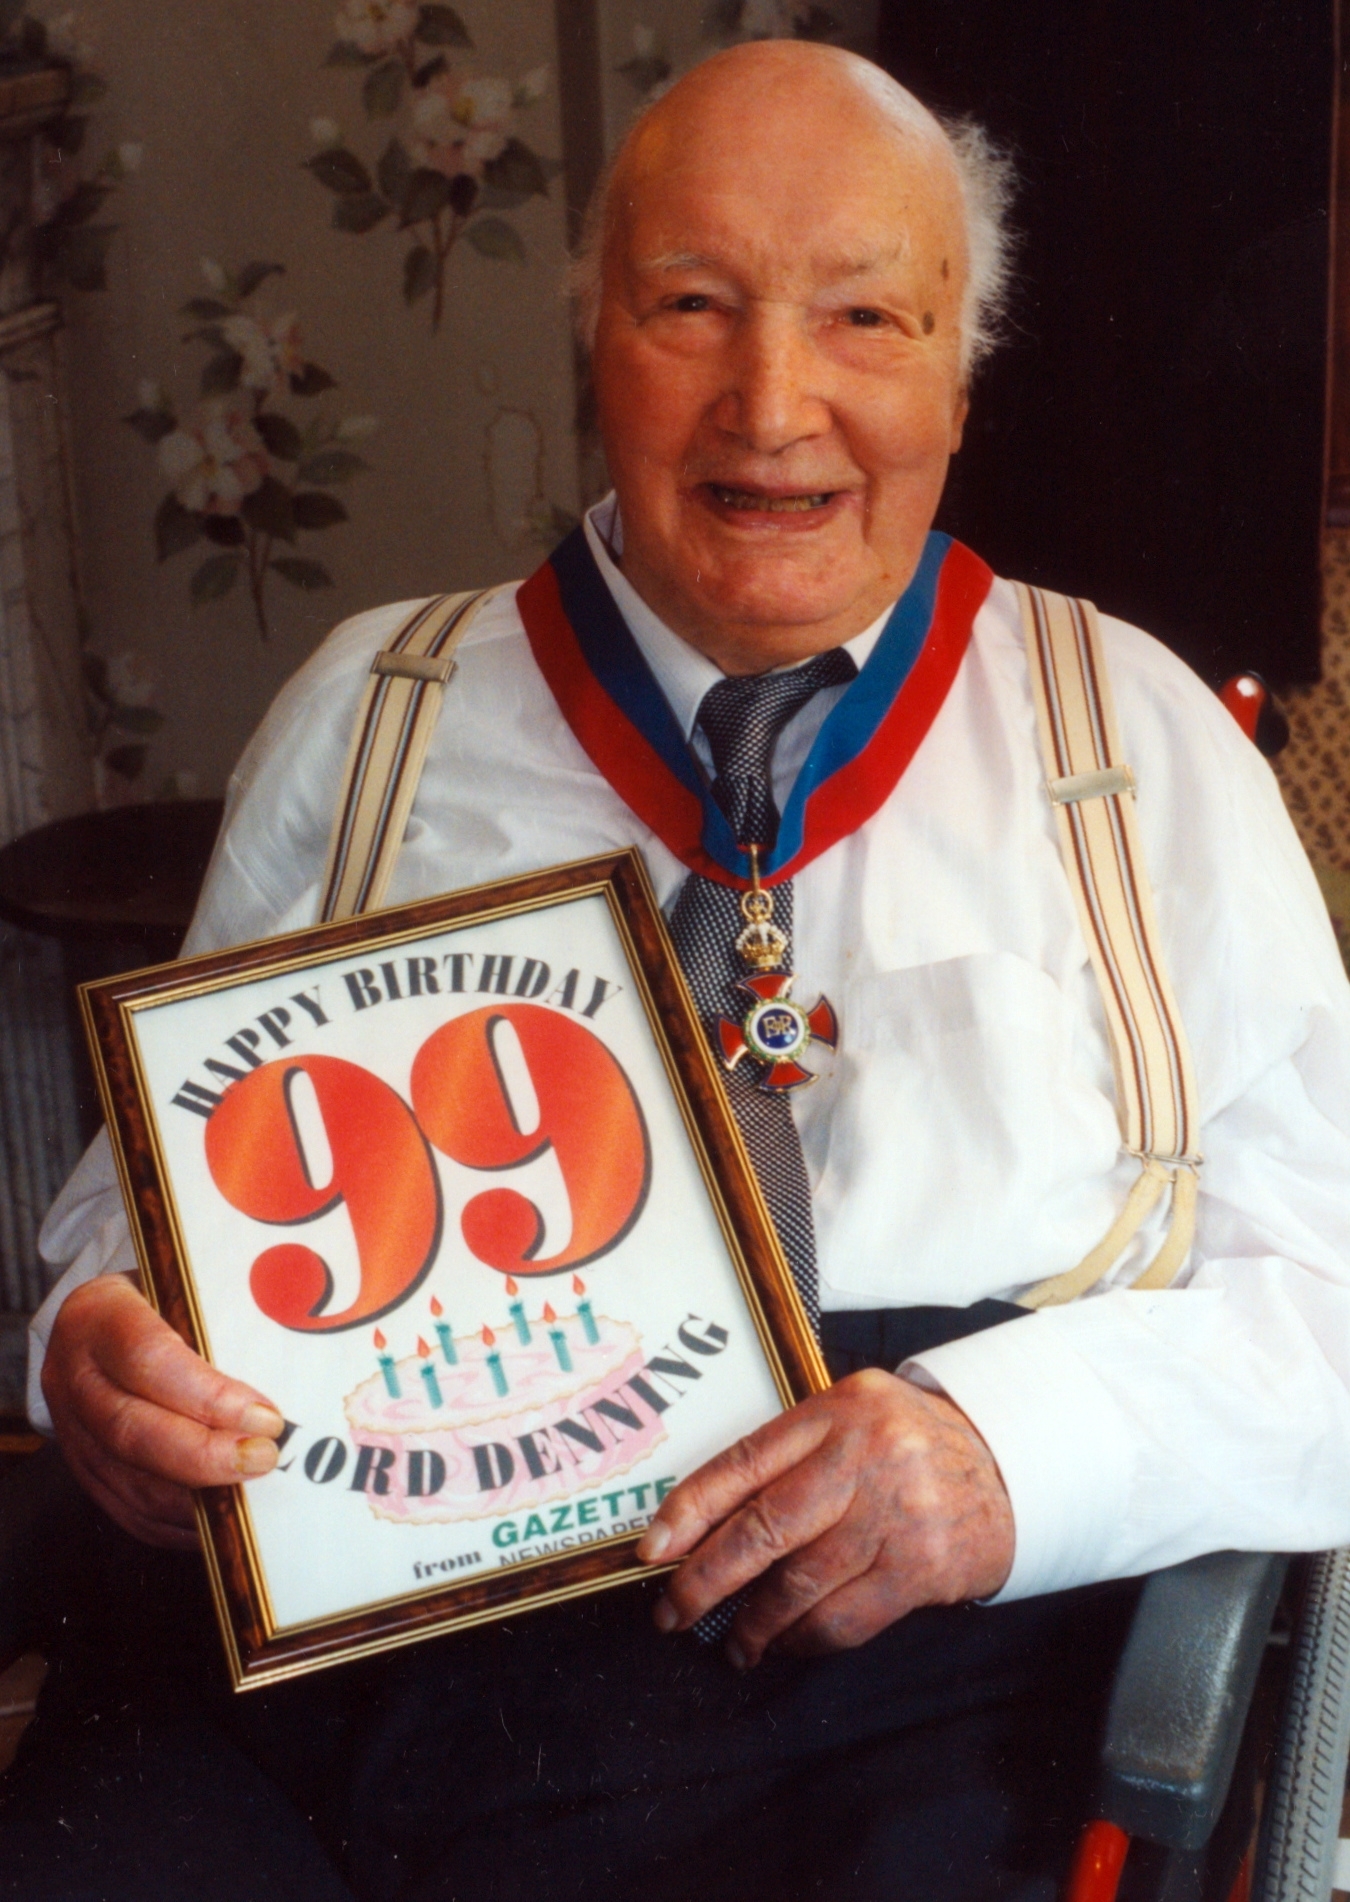 Lord Denning with a birthday card on his 99th birthday